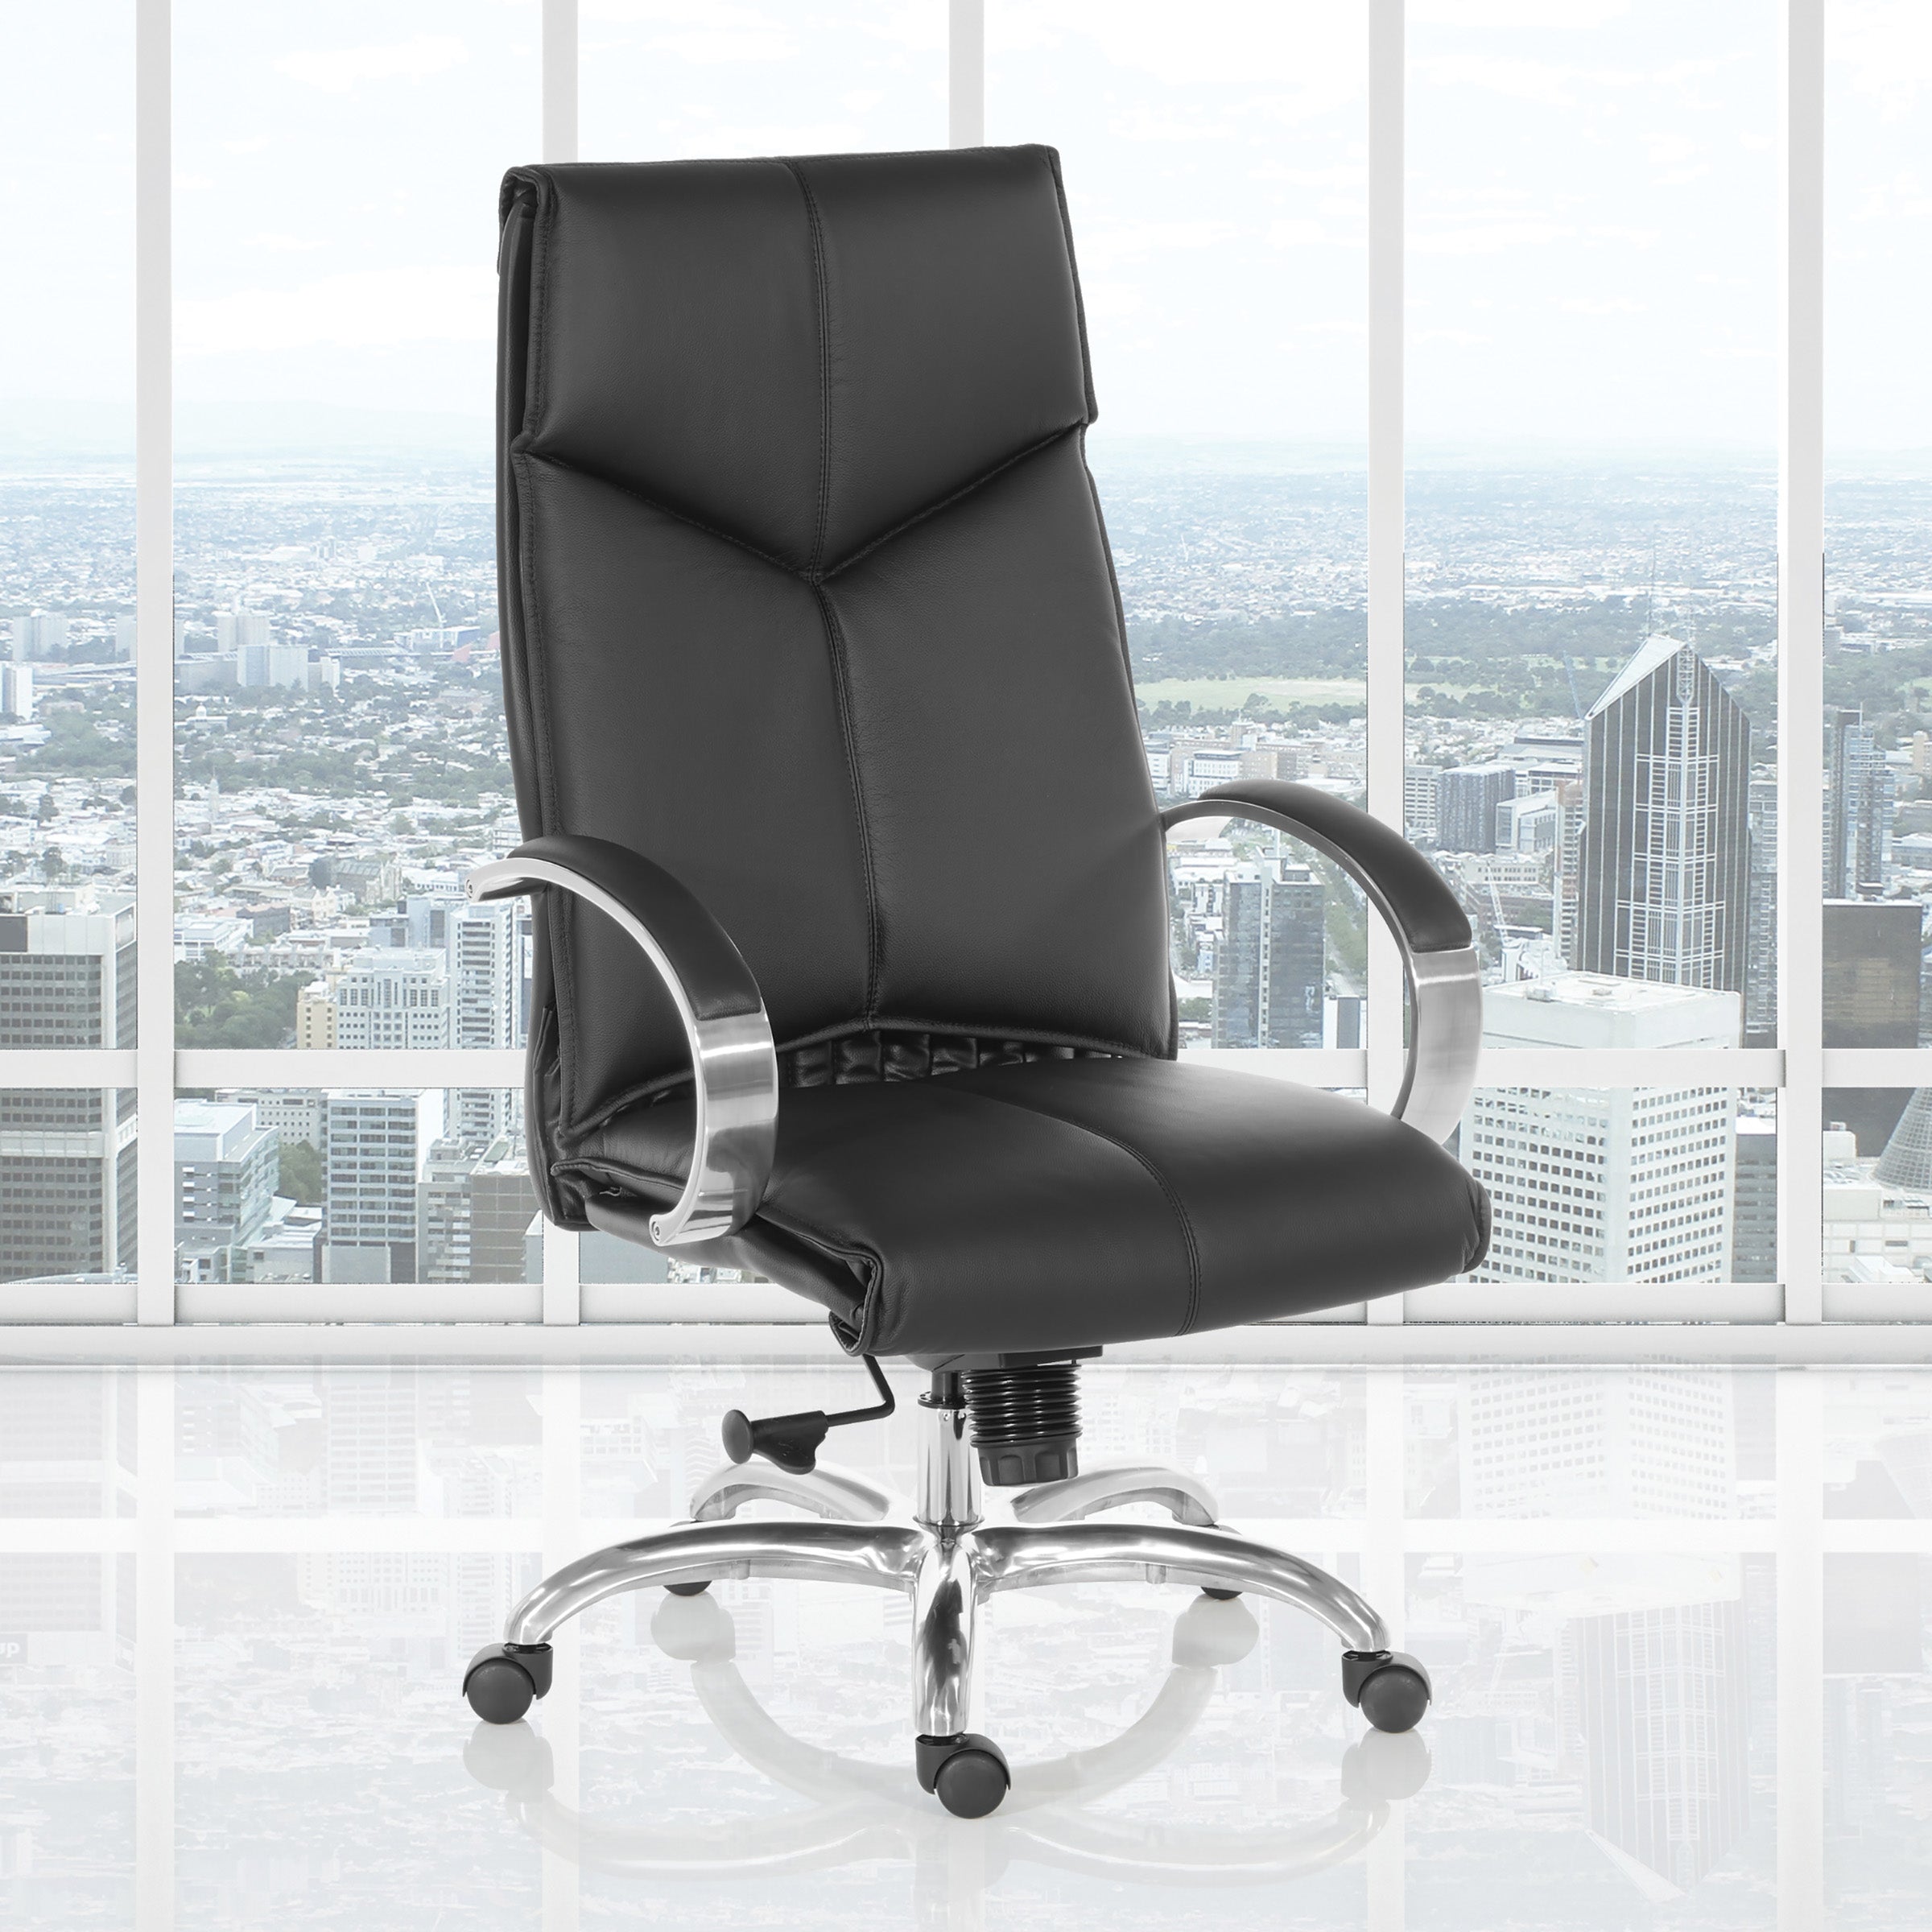 8200 - Deluxe High Back Executive Leather Chair with Chrome Base and Padded Chrome Arms